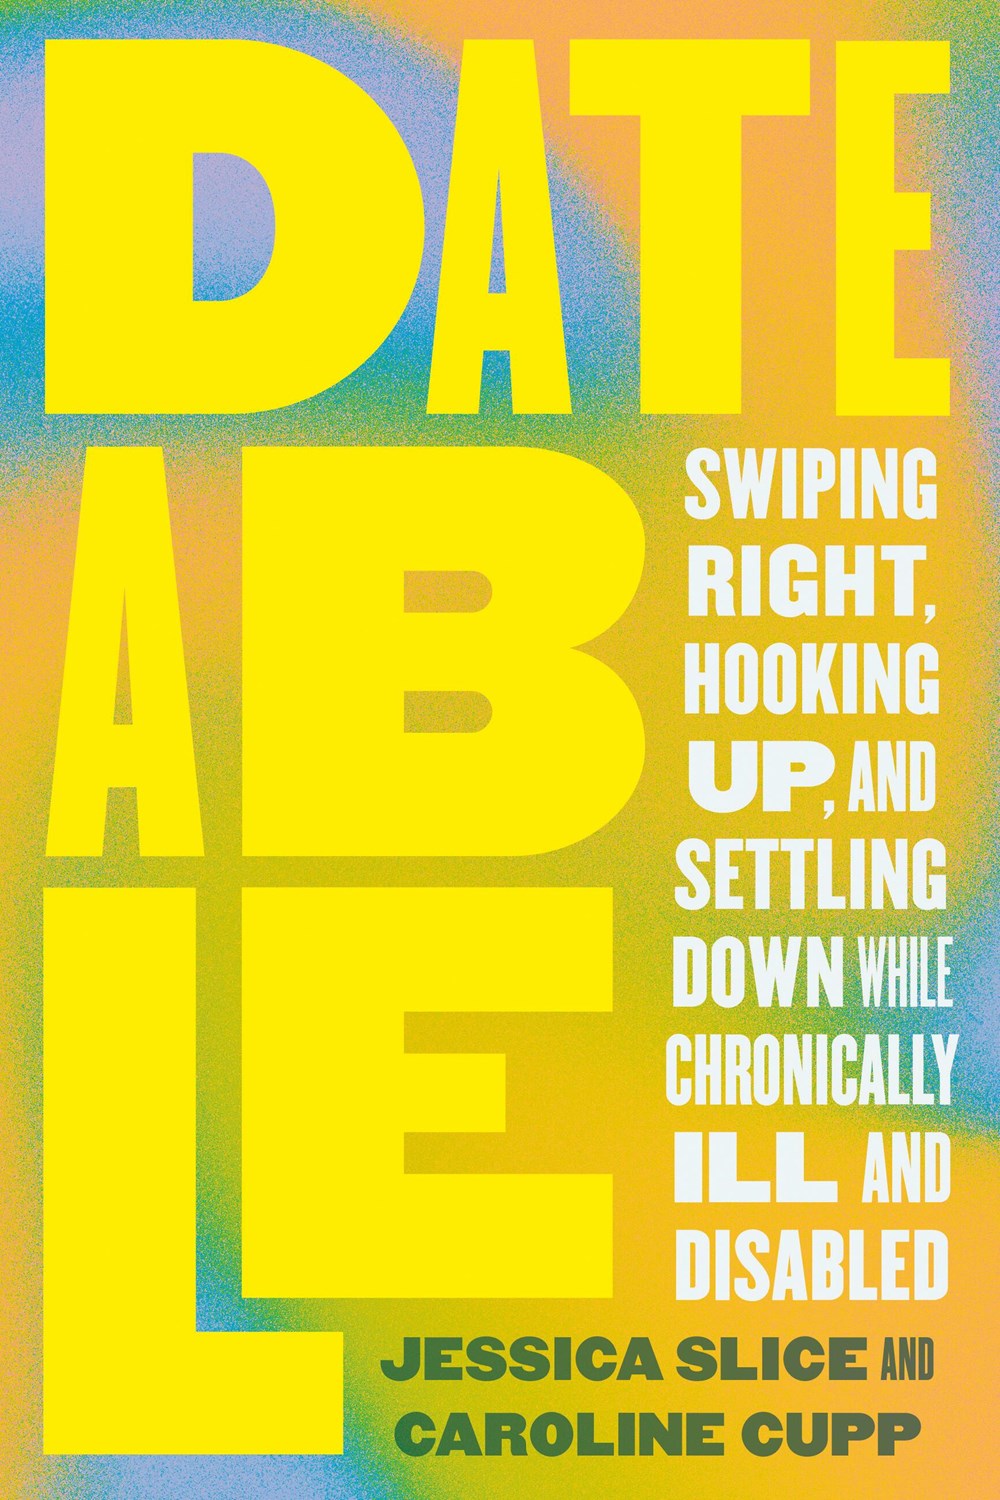 ‘Dateable: Swiping Right, Hooking Up, and Settling Down While Chronically Ill and Disabled’ by Jessica Slice & Caroline Cupp | LJ Review of the Day